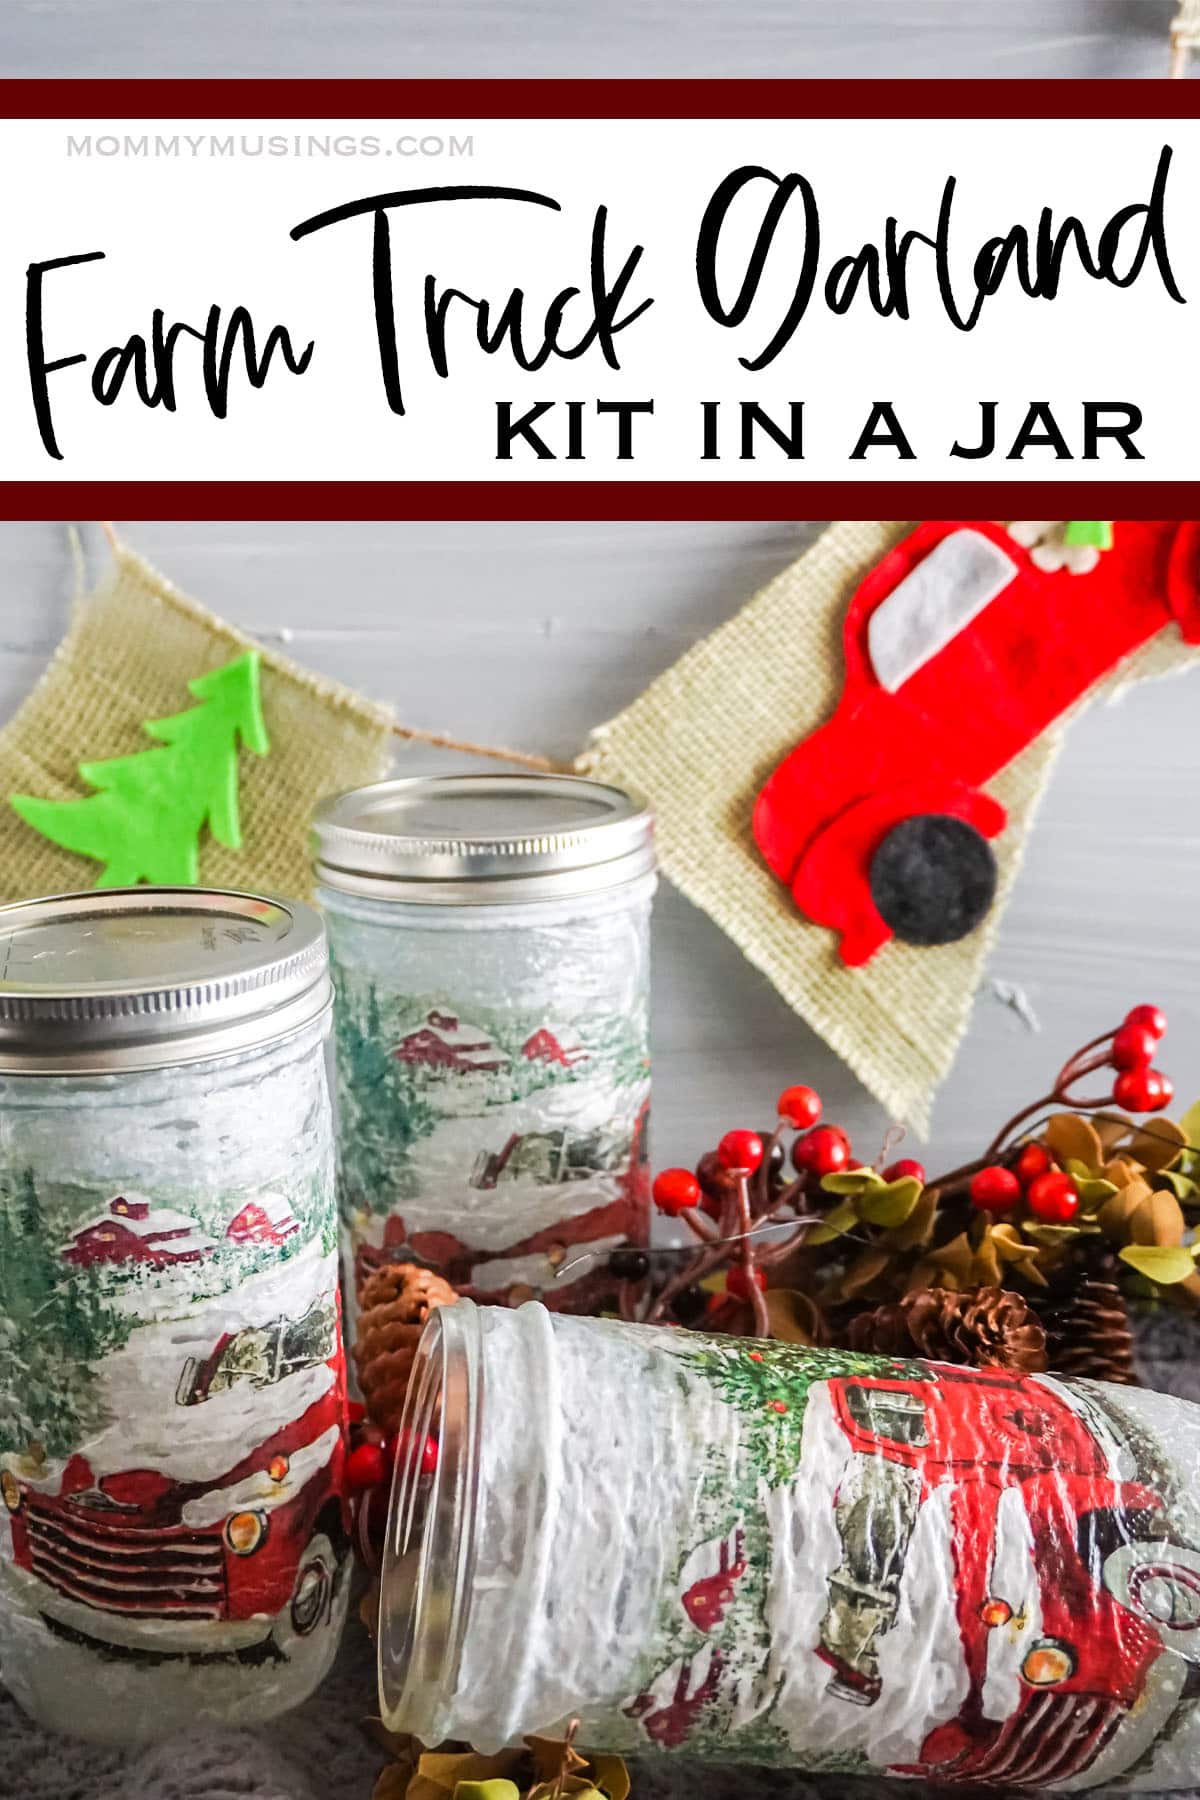 easy diy christmas truck garland kit in a mason jar with text which reads farm truck garland kit in a jar